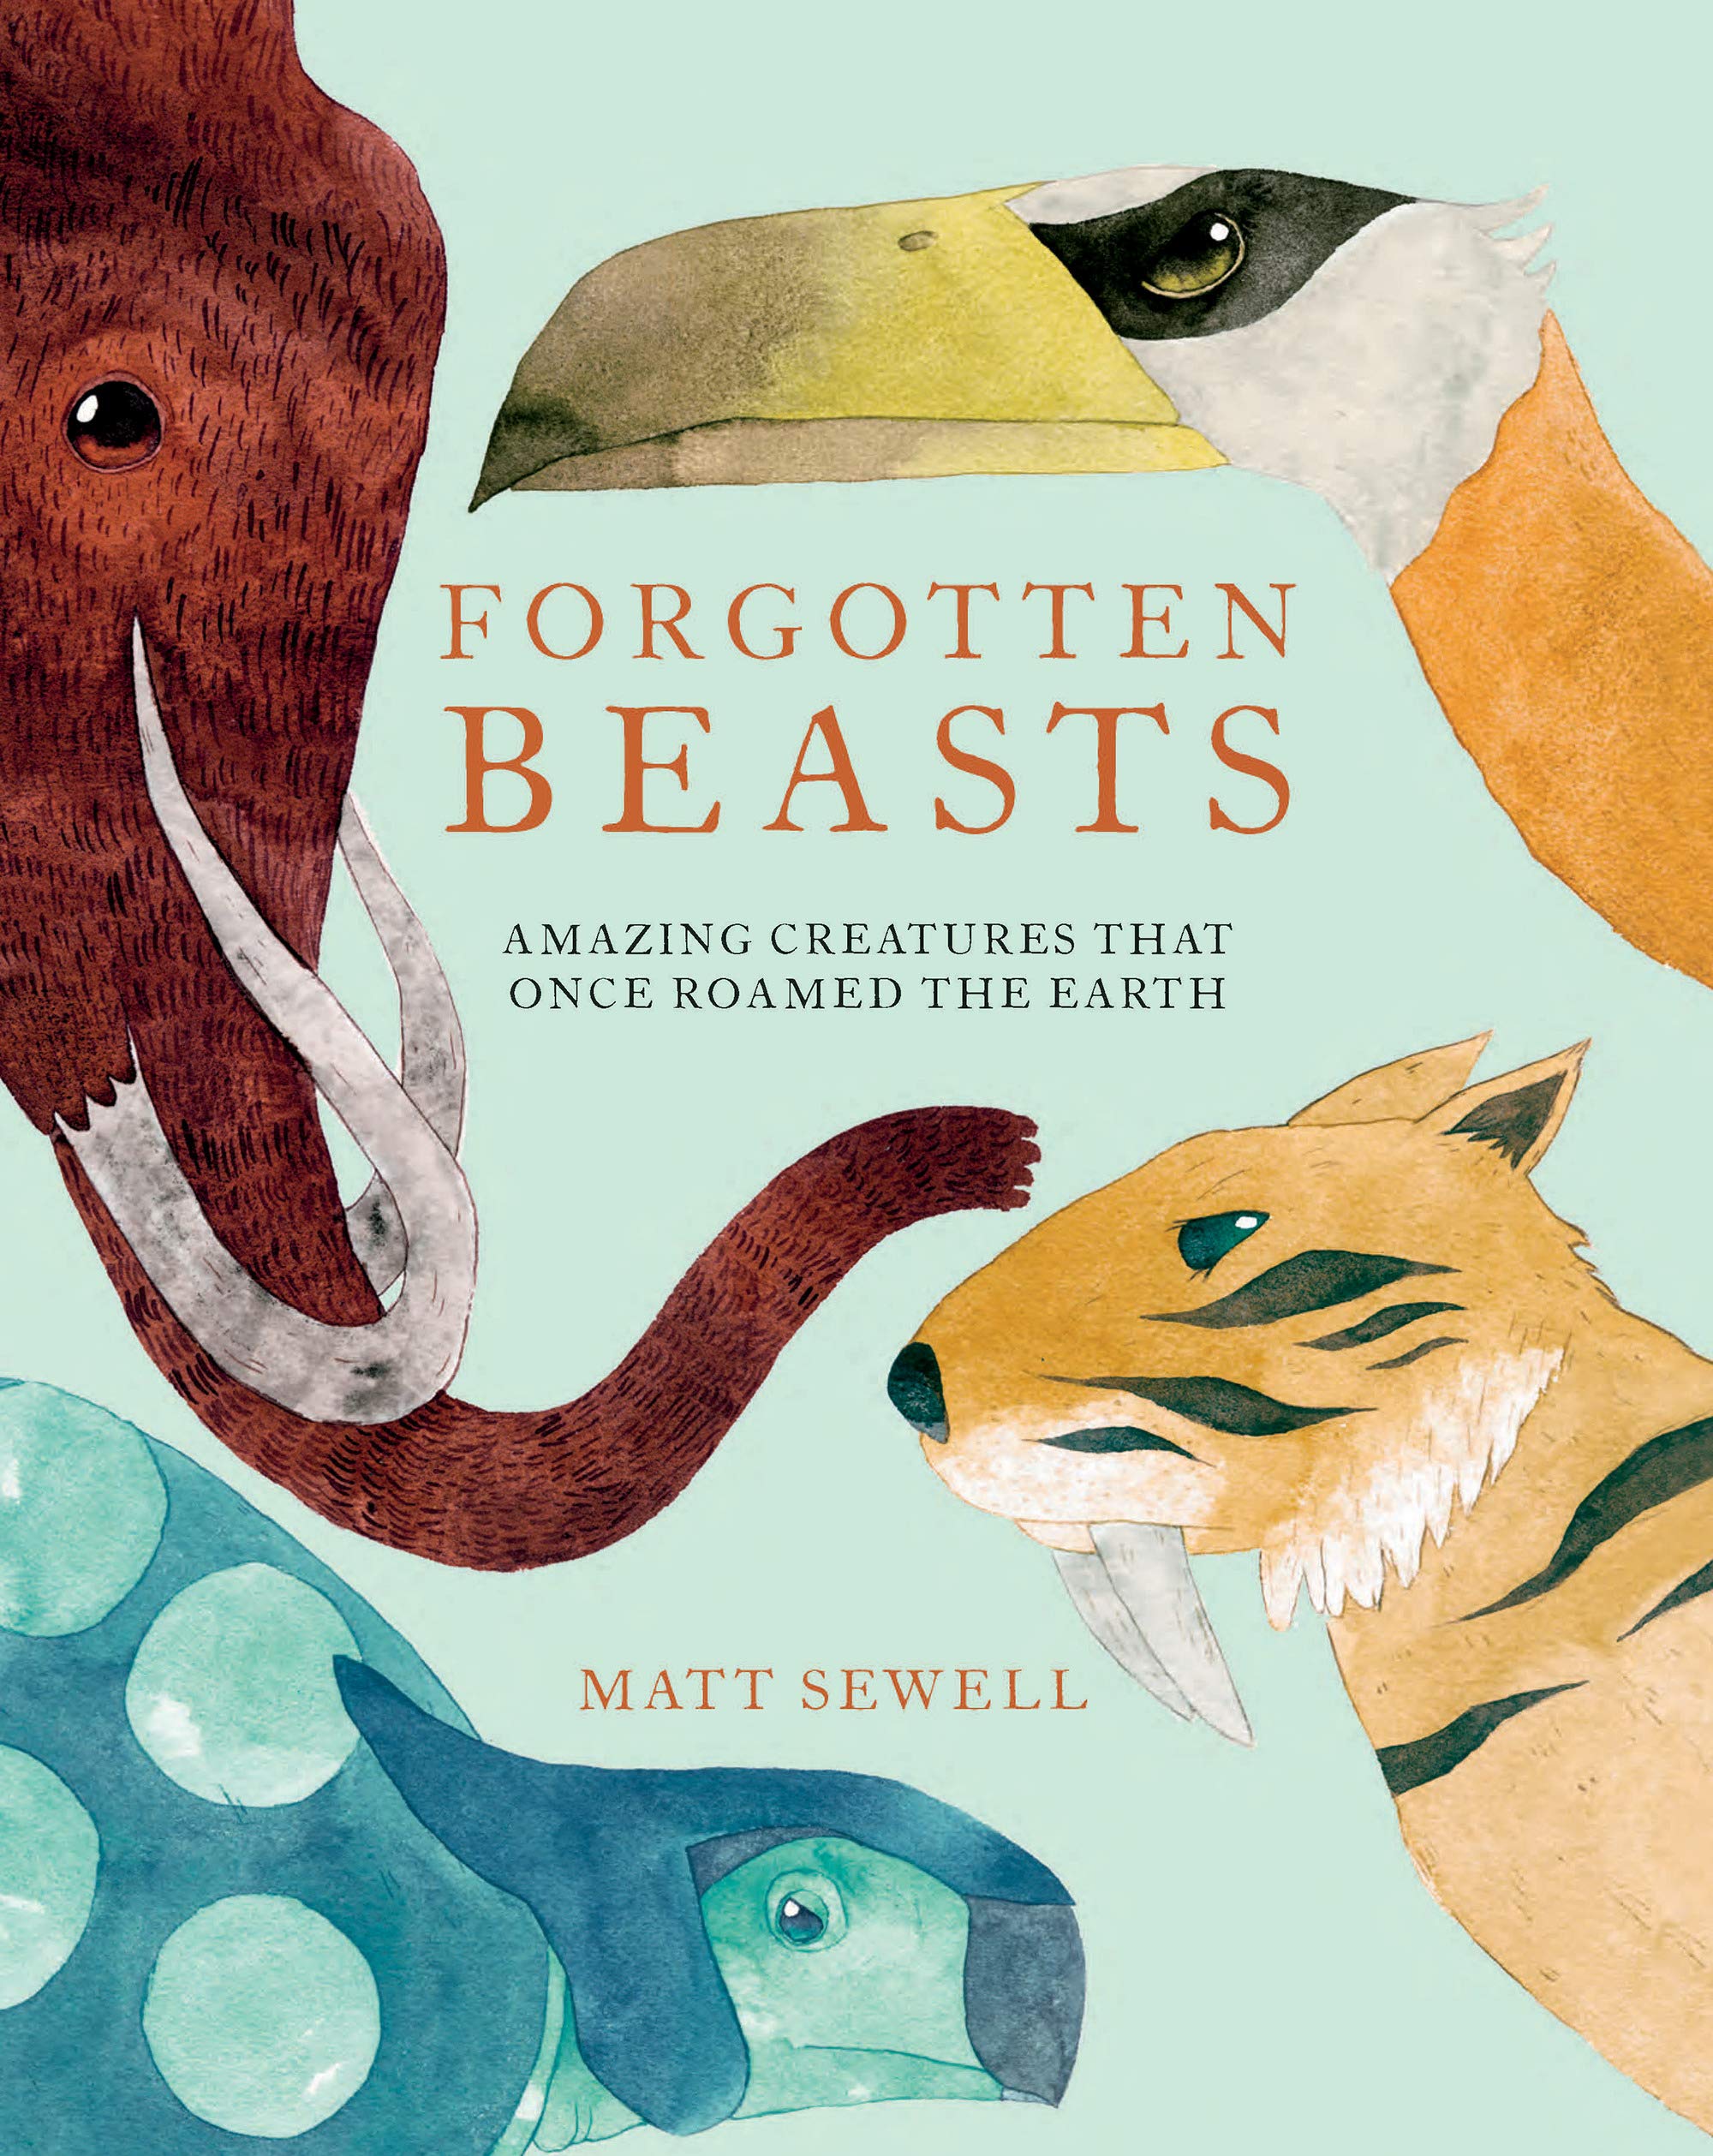 Forgotten Beasts: Amazing creatures that once roamed the Earth